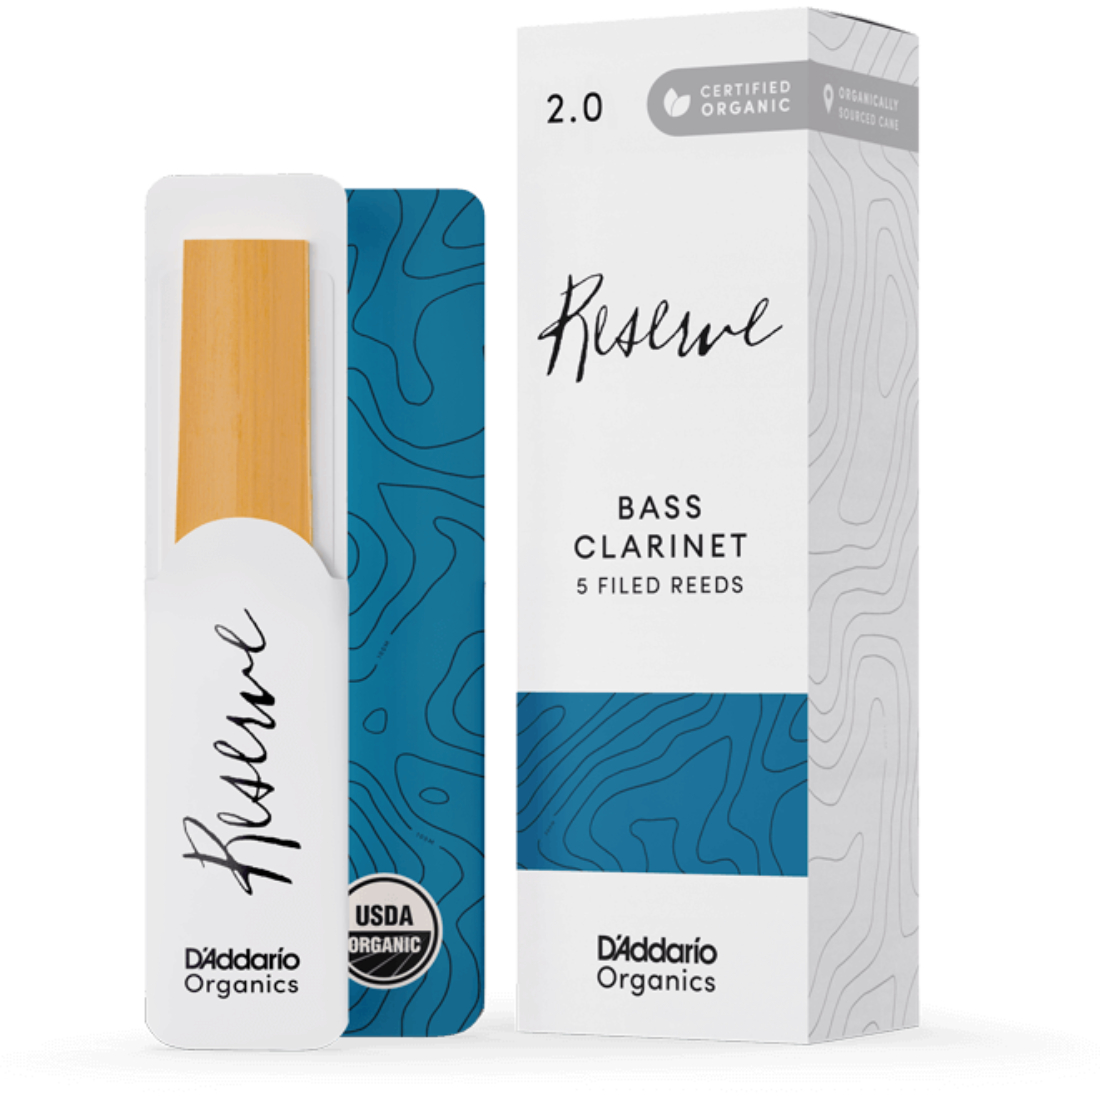 White box of Five D'addario Reserve Bass Clarinet Reeds